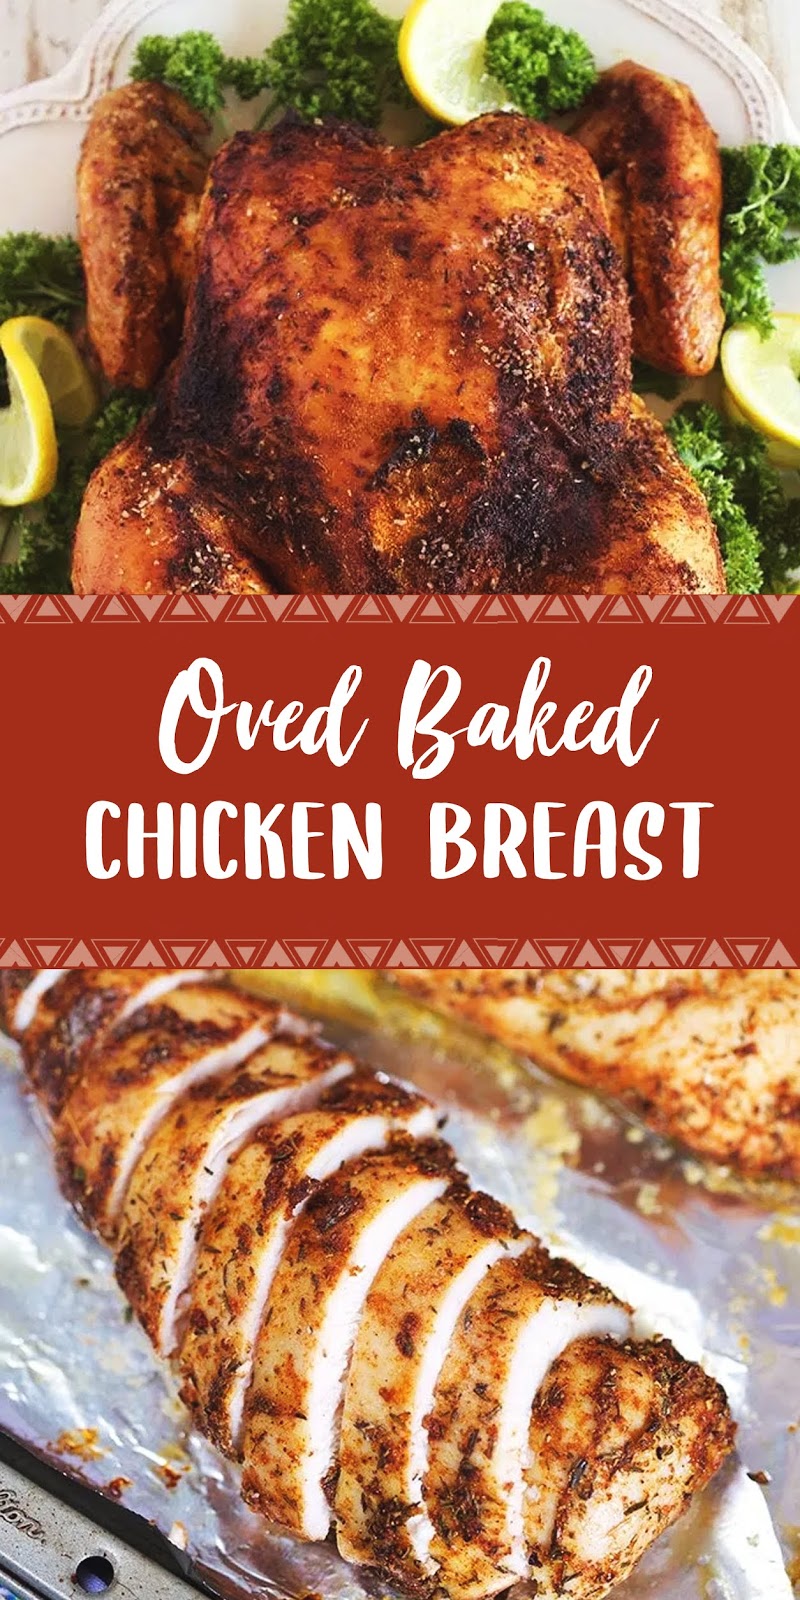 OVEN BAKED CHICKEN BREAST - Healthy